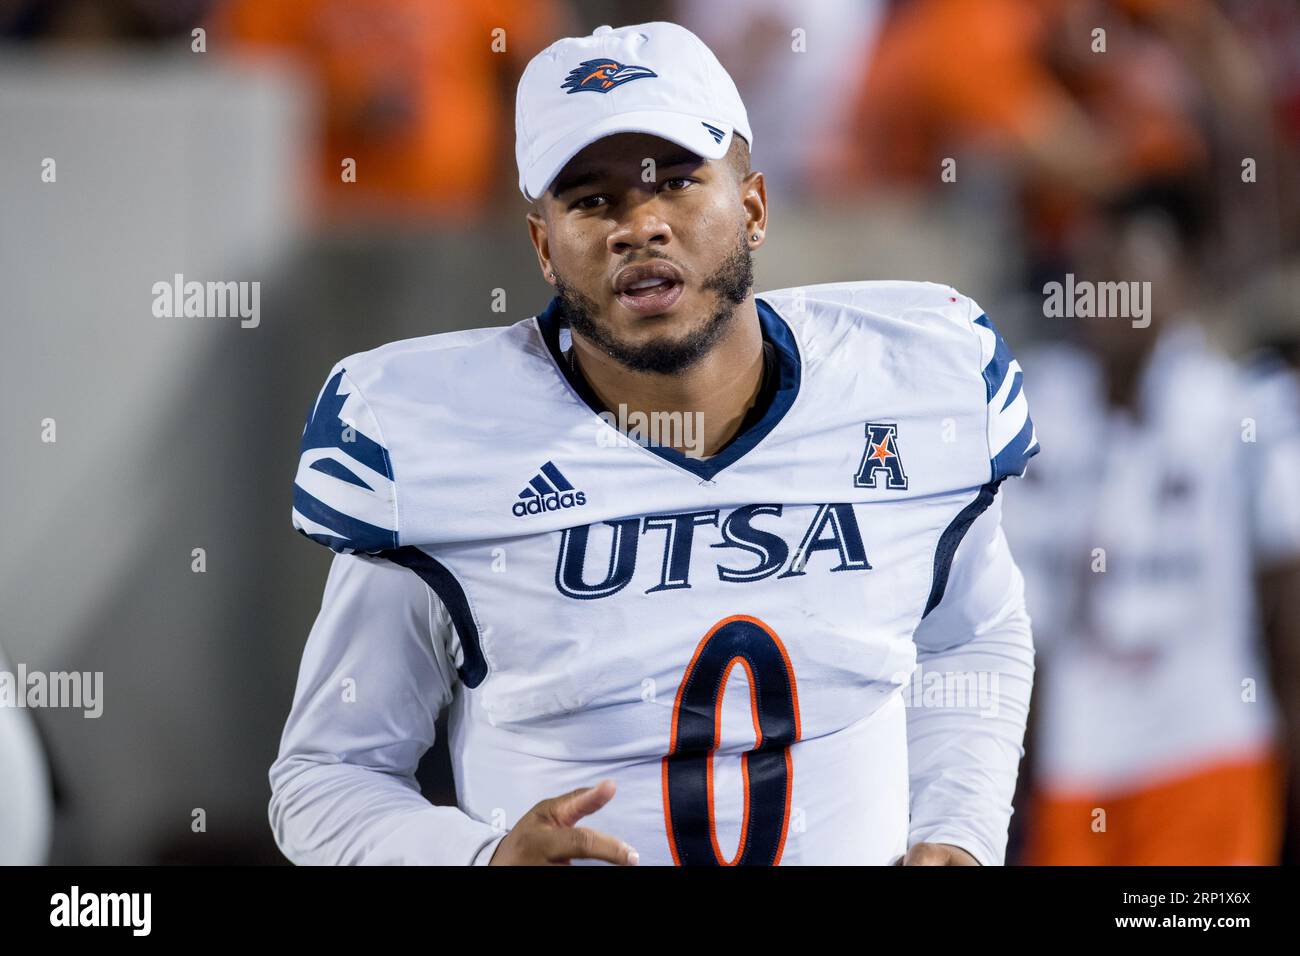 Houston, TX, USA. 2nd Sep, 2023. UTSA Roadrunners quarterback Frank Harris (0) runs onto the filed after halftime of a game between the UTSA Roadrunners and the Houston Cougars in Houston, TX. Trask Smith/CSM/Alamy Live News Stock Photo